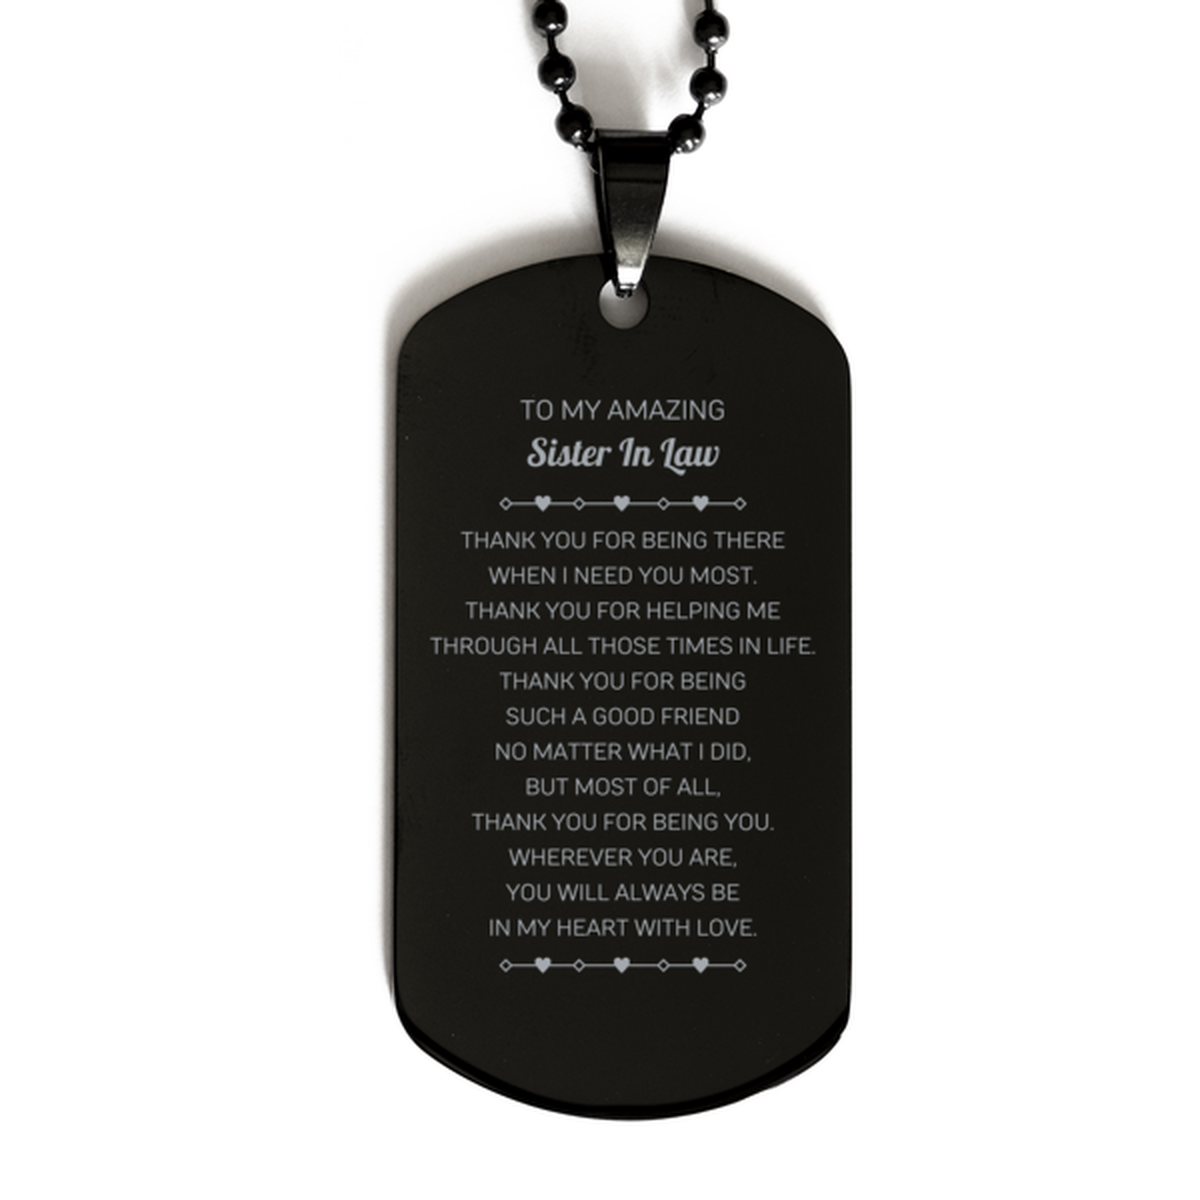 To My Amazing Sister In Law Black Dog Tag, Thank you for being there, Thank You Gifts For Sister In Law, Birthday, Christmas Unique Gifts For Sister In Law